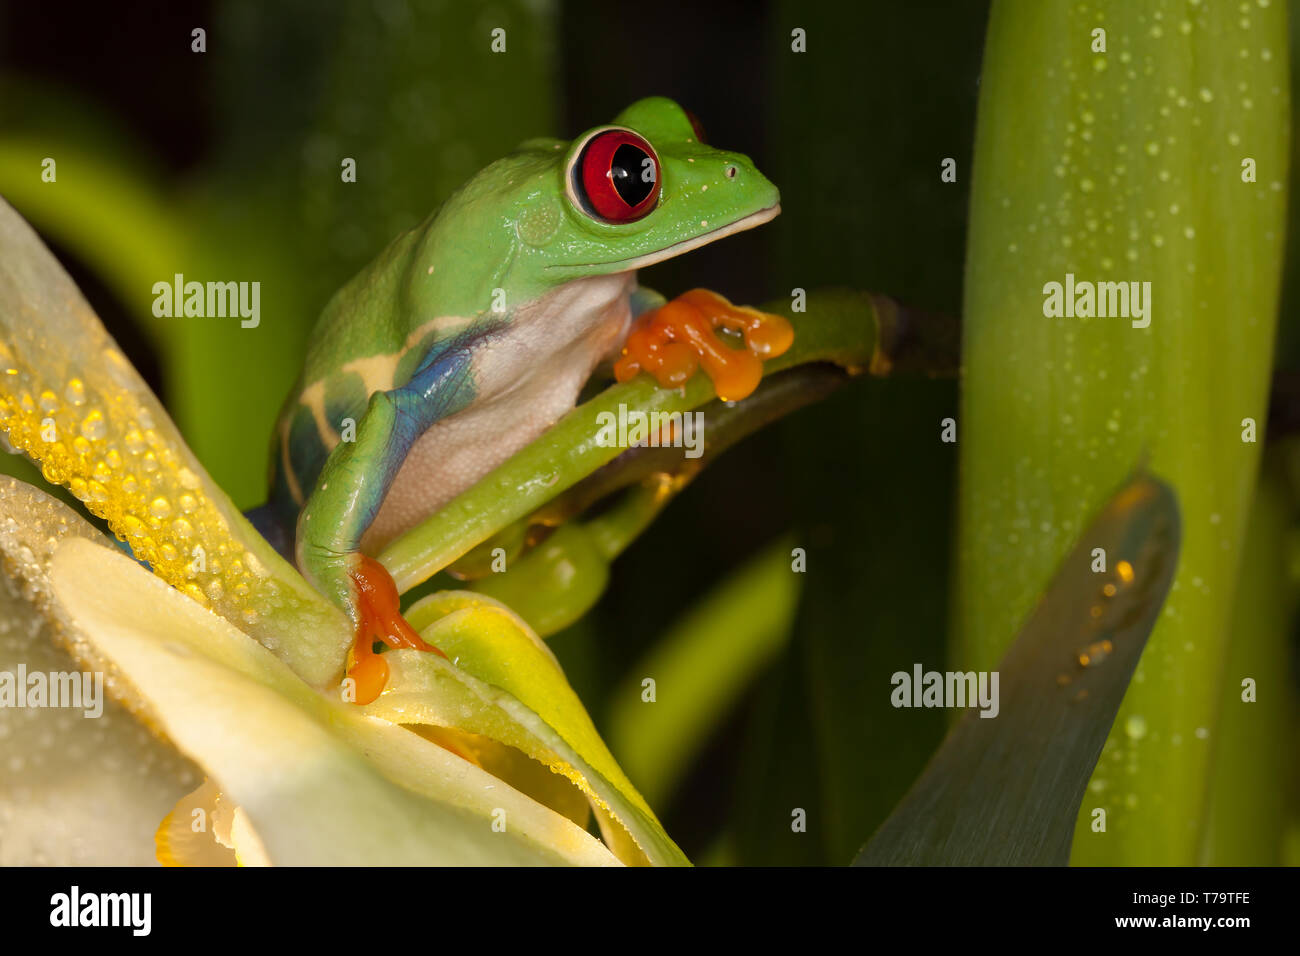 Red eye frog on the orchid flower Stock Photo